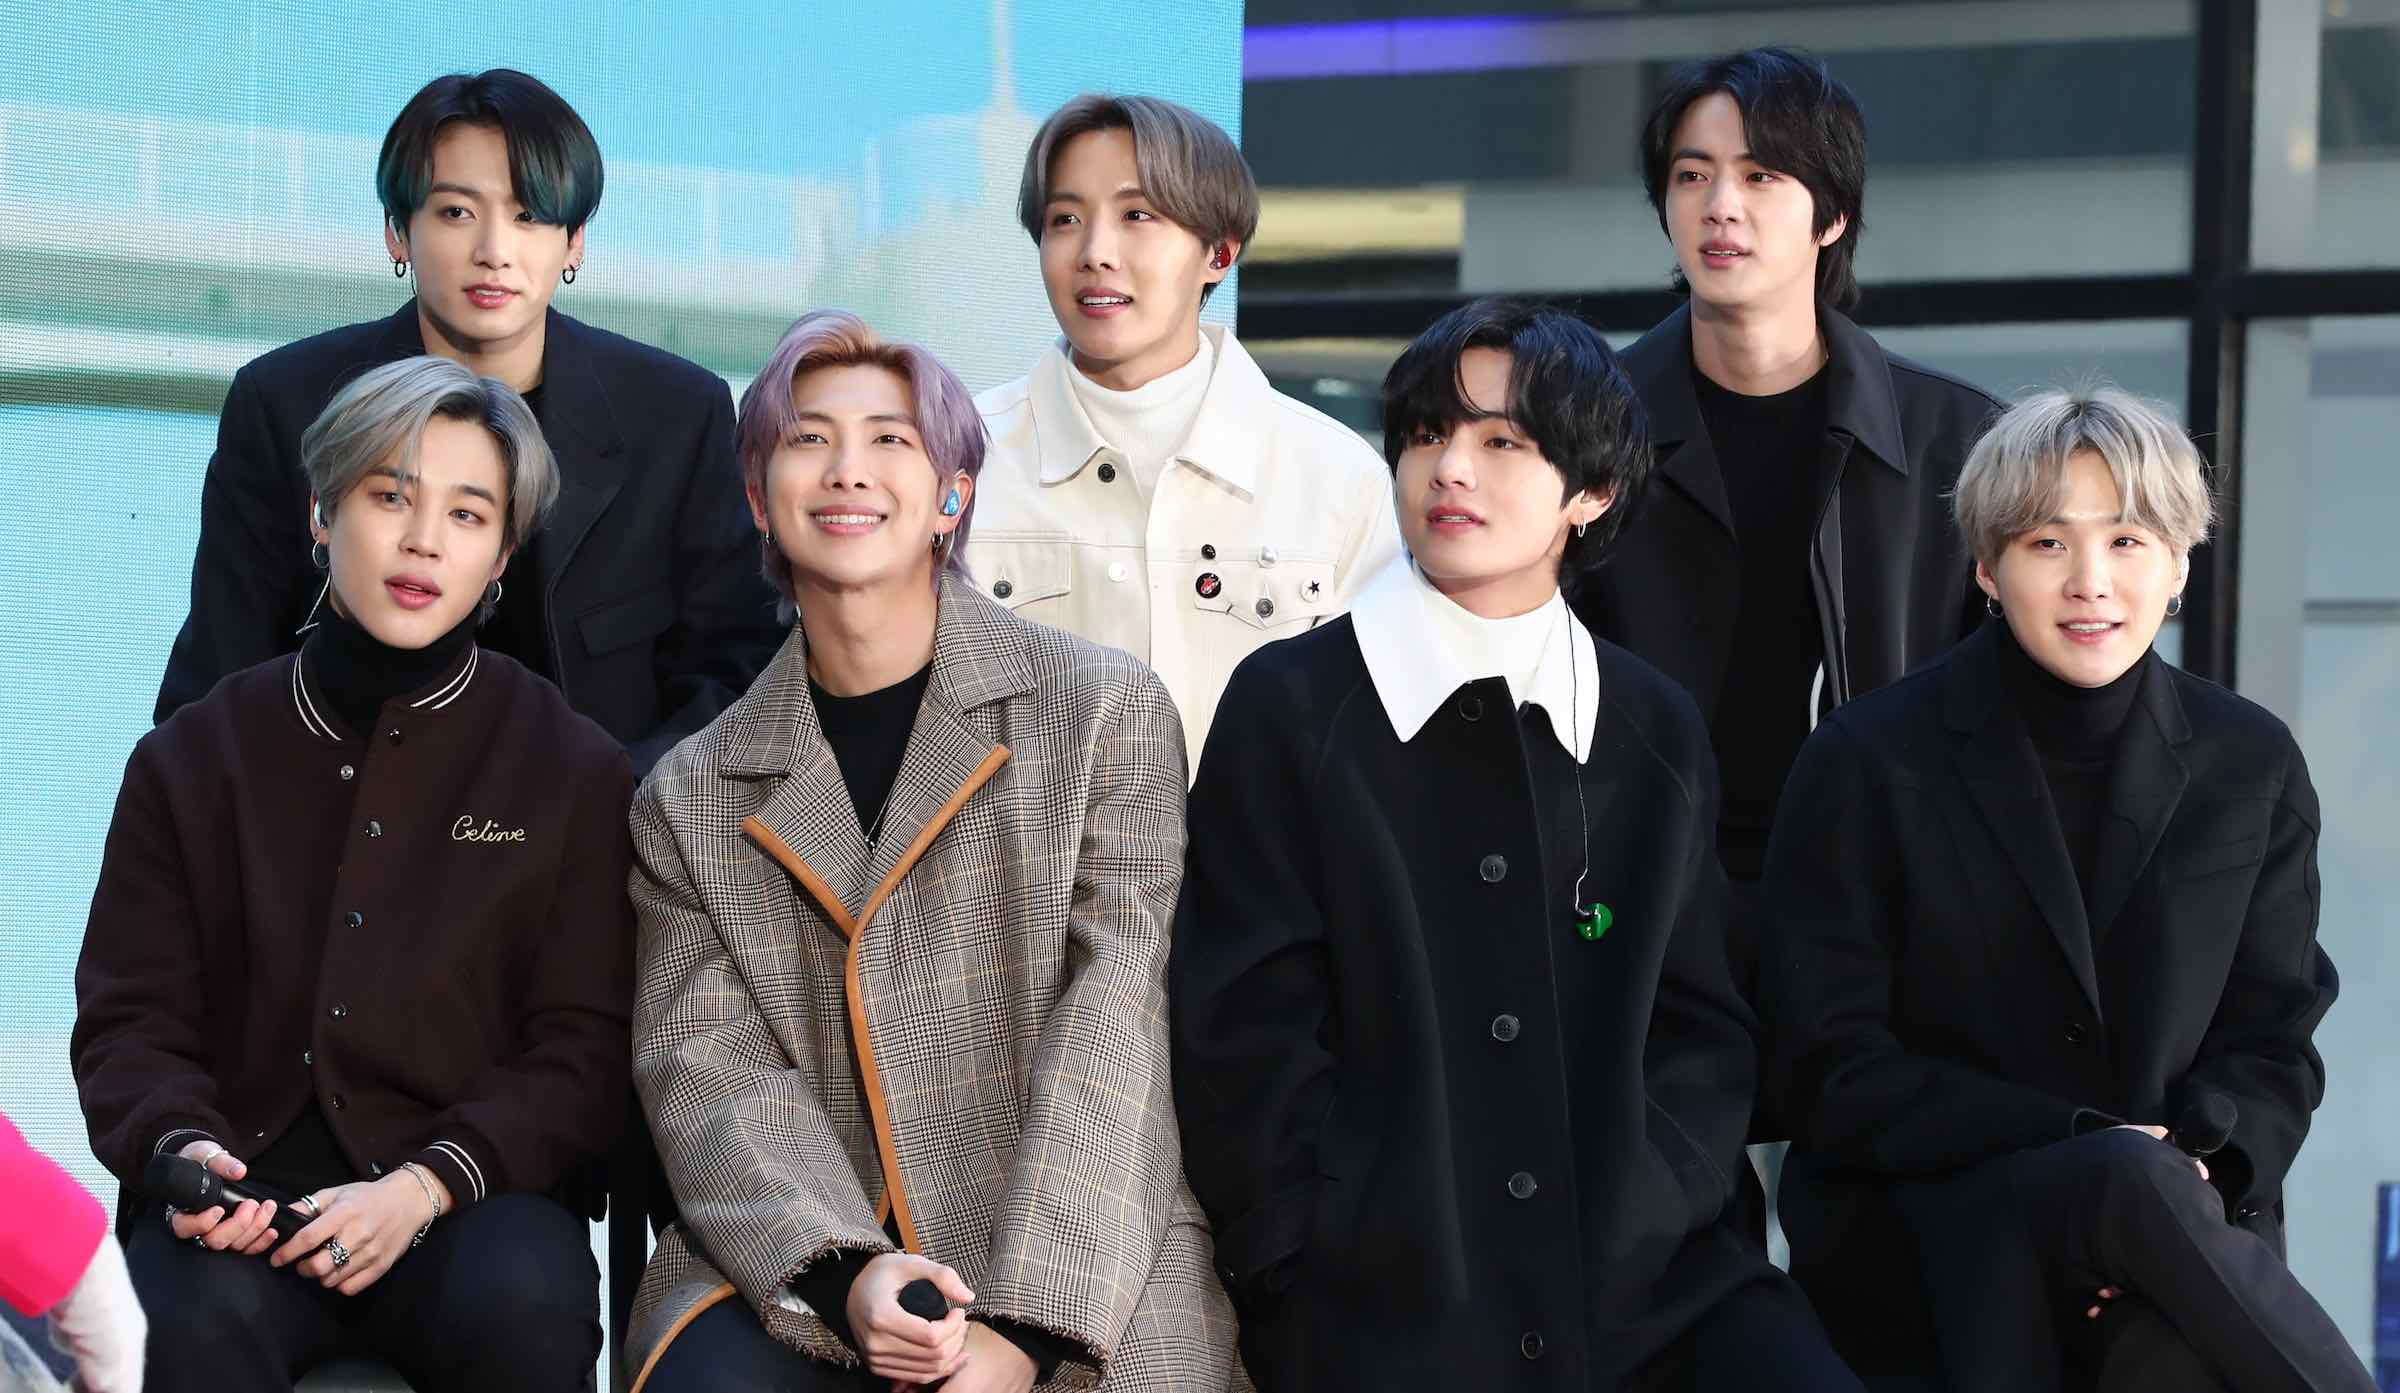 Cryptic BTS tweets leaving you caffeine-fueled at 3 AM? Discover the BTS meaning behind their latest tweet-posals, unravel the enigma, and quench your K-pop curiosity.